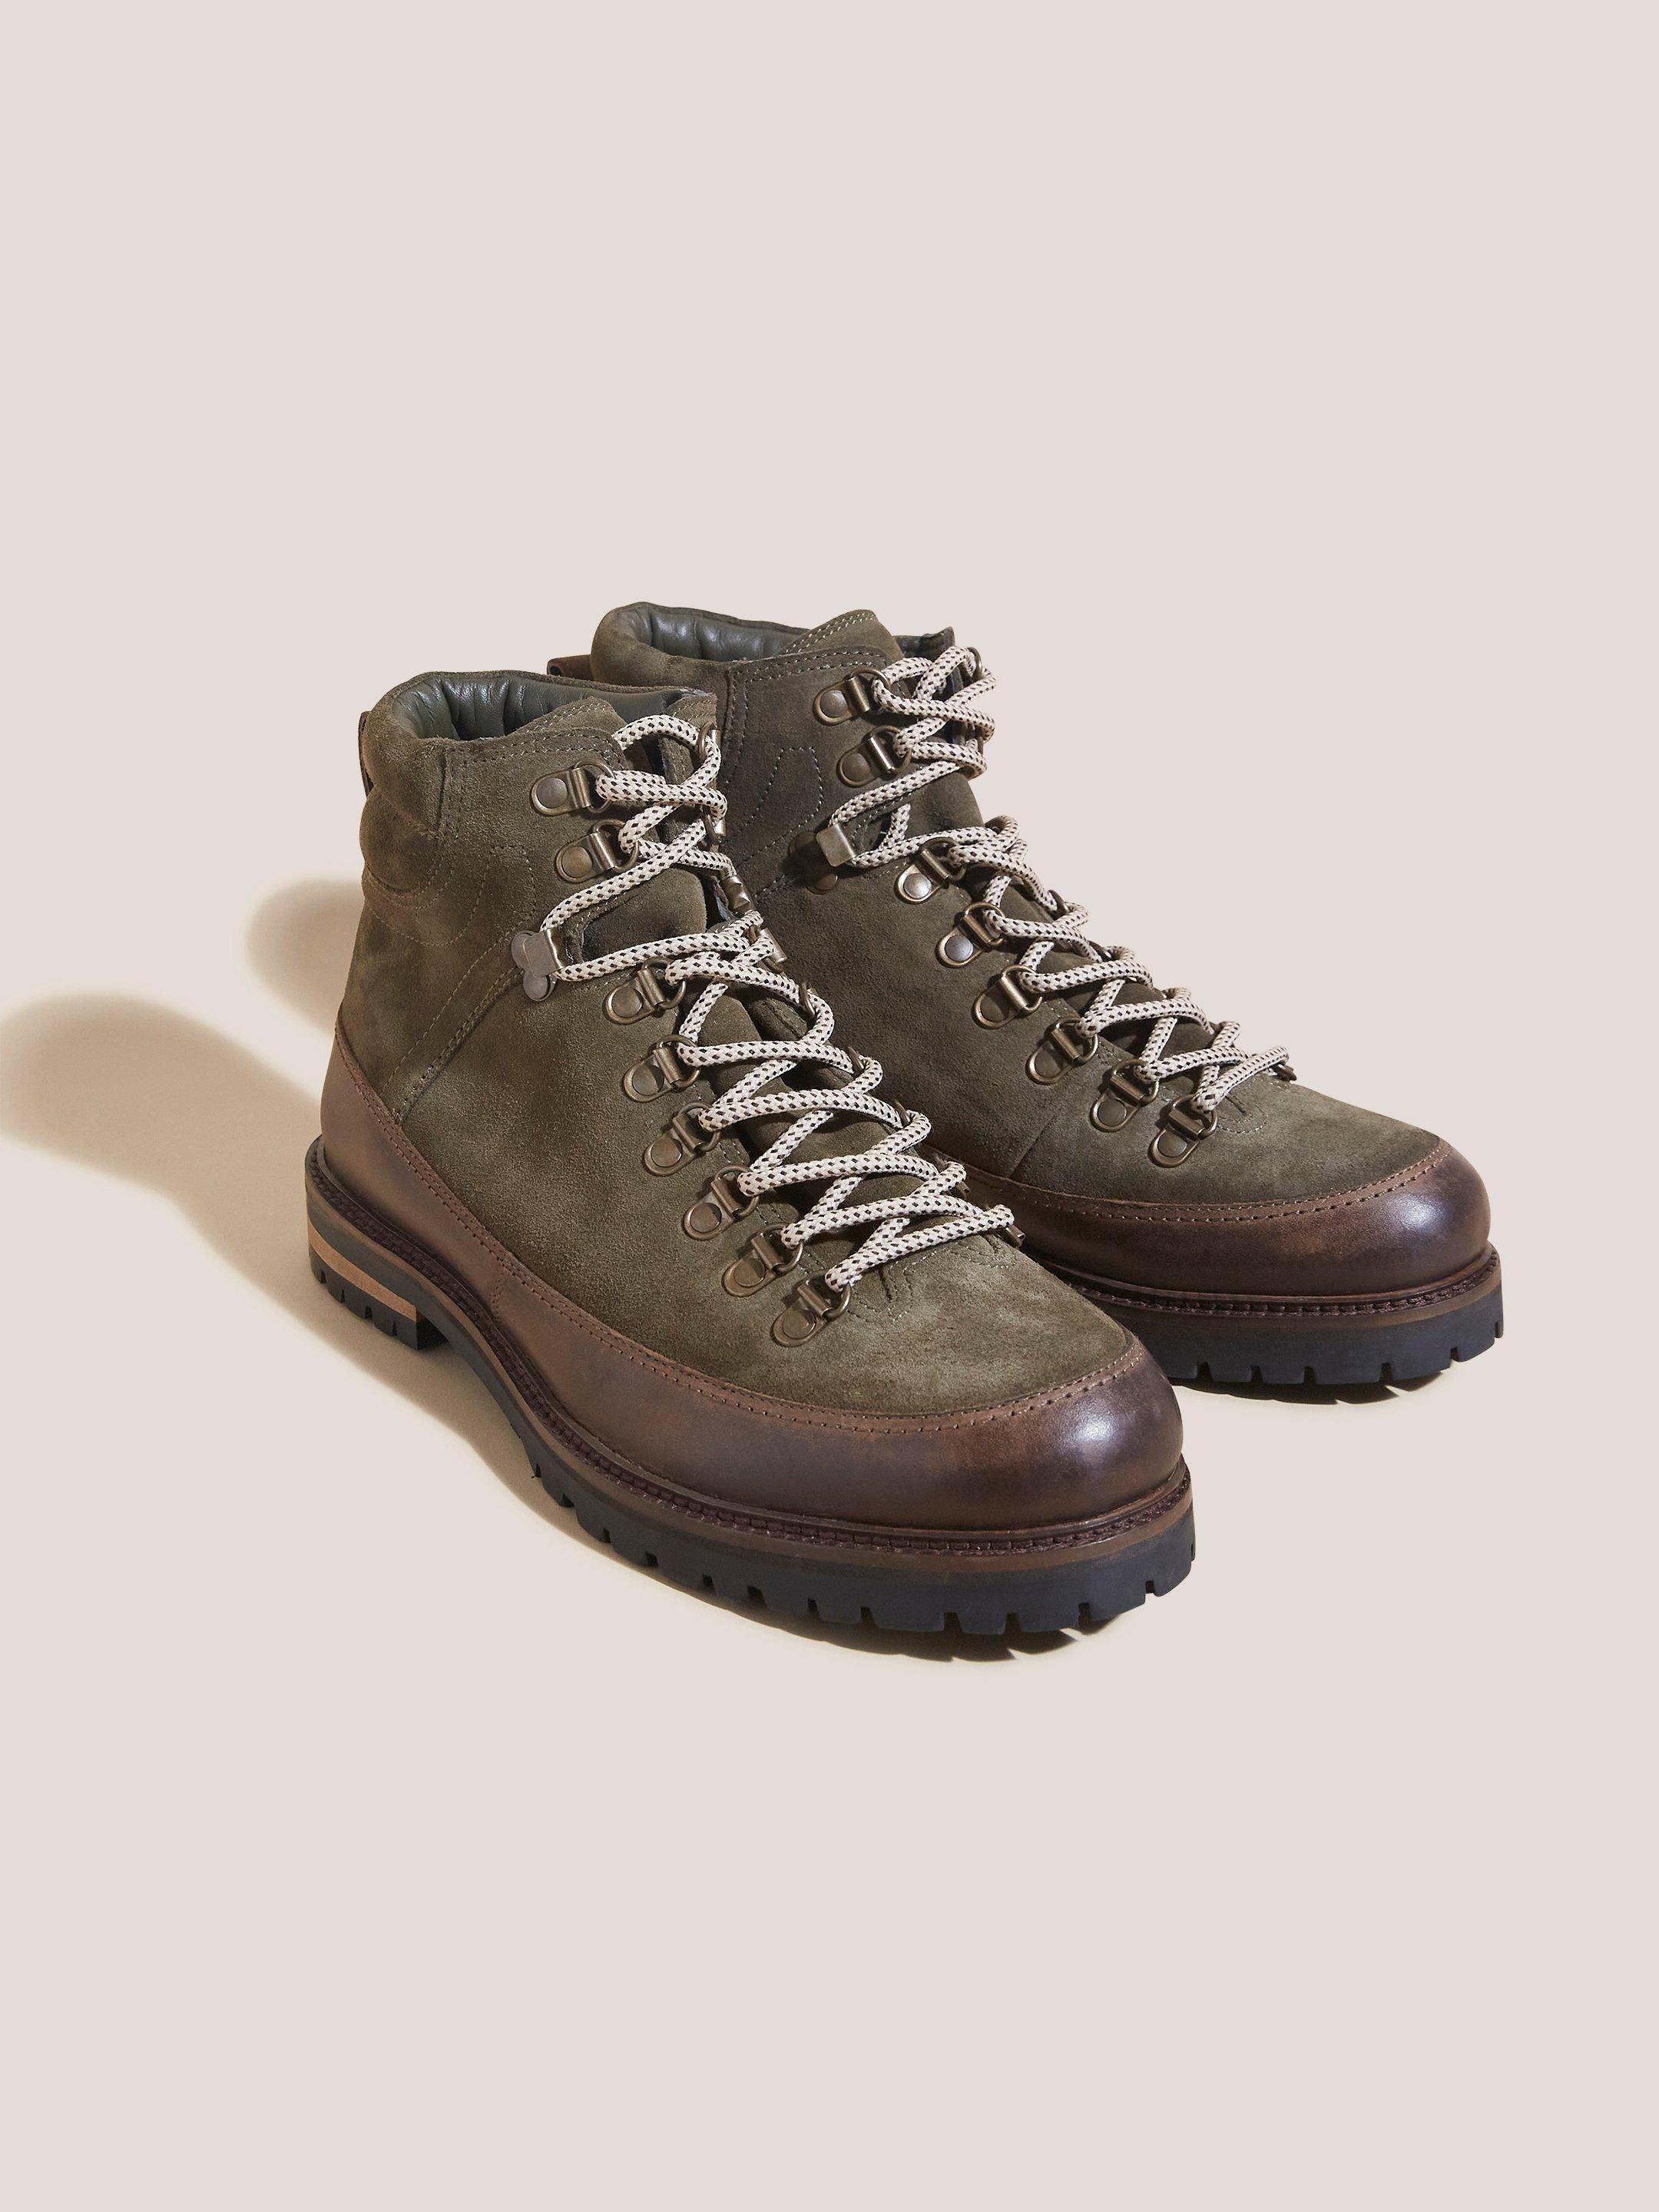 Henry Suede Hiker Boot in KHAKI GRN - FLAT FRONT